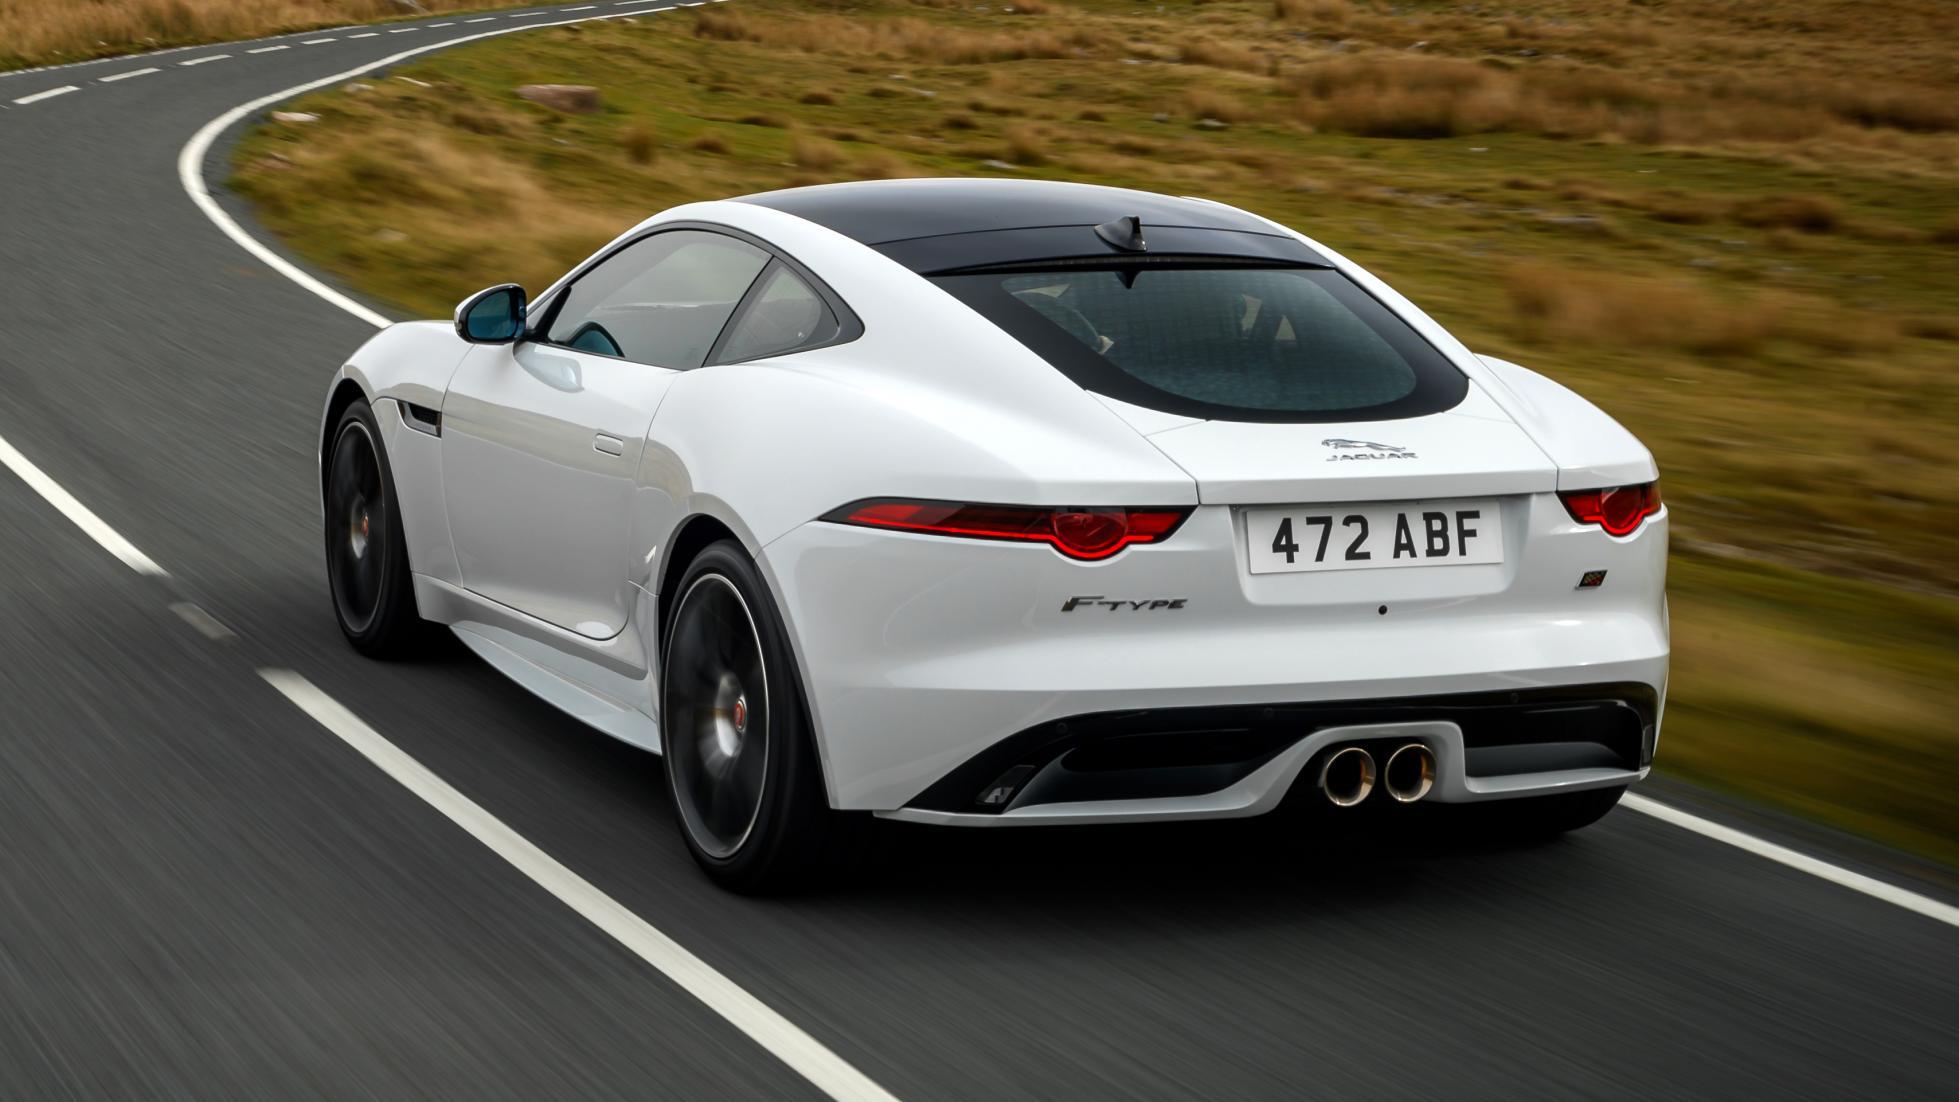 Complete car info for 39 The 2020 Jaguar F Type Picture